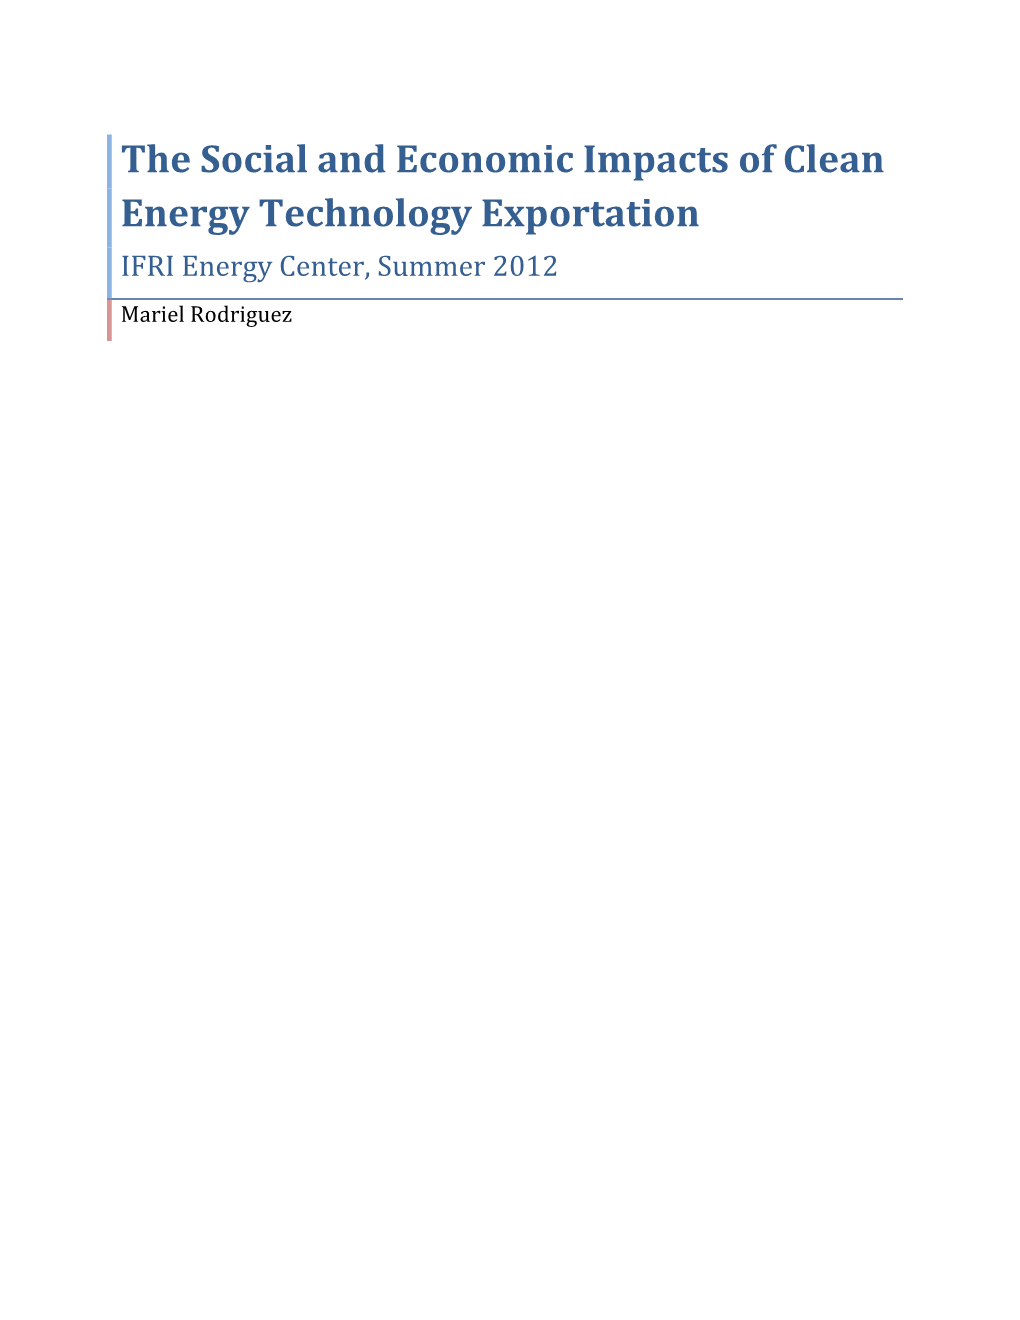 The Social and Economic Impacts of Clean Energy Technology Exportation IFRI Energy Center, Summer 2012 Mariel Rodriguez